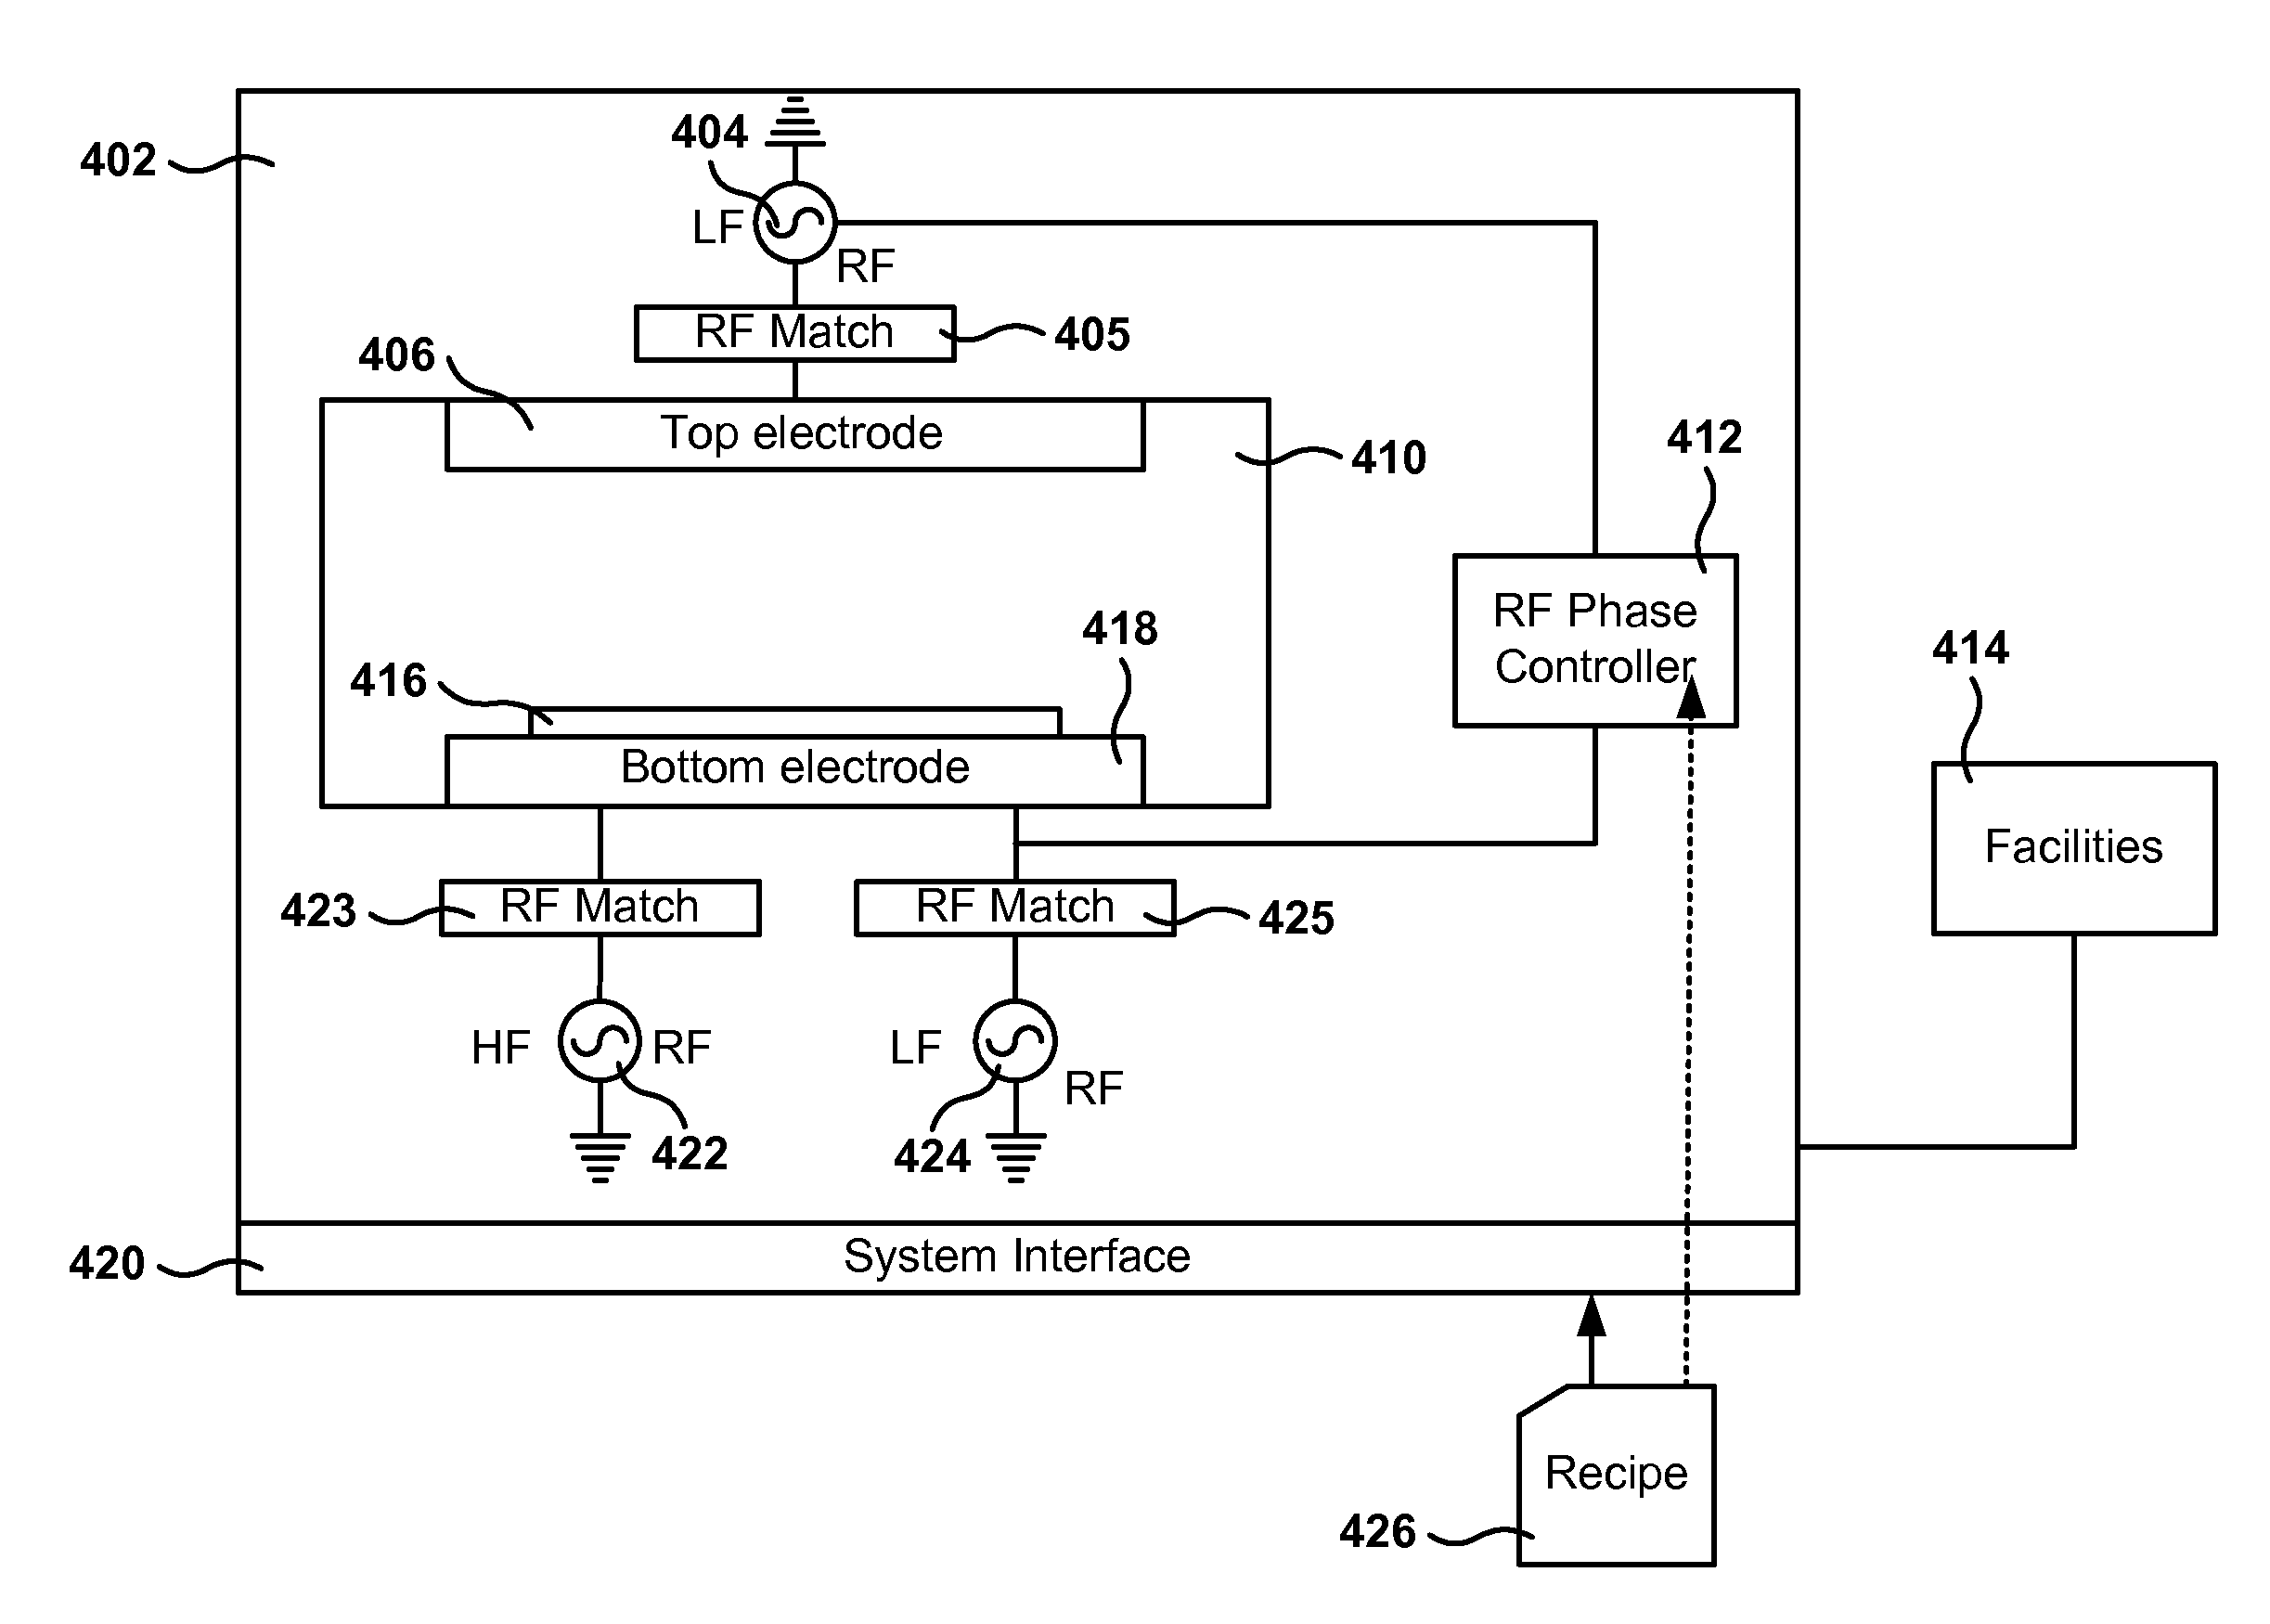 Negative Ion Control for Dielectric Etch